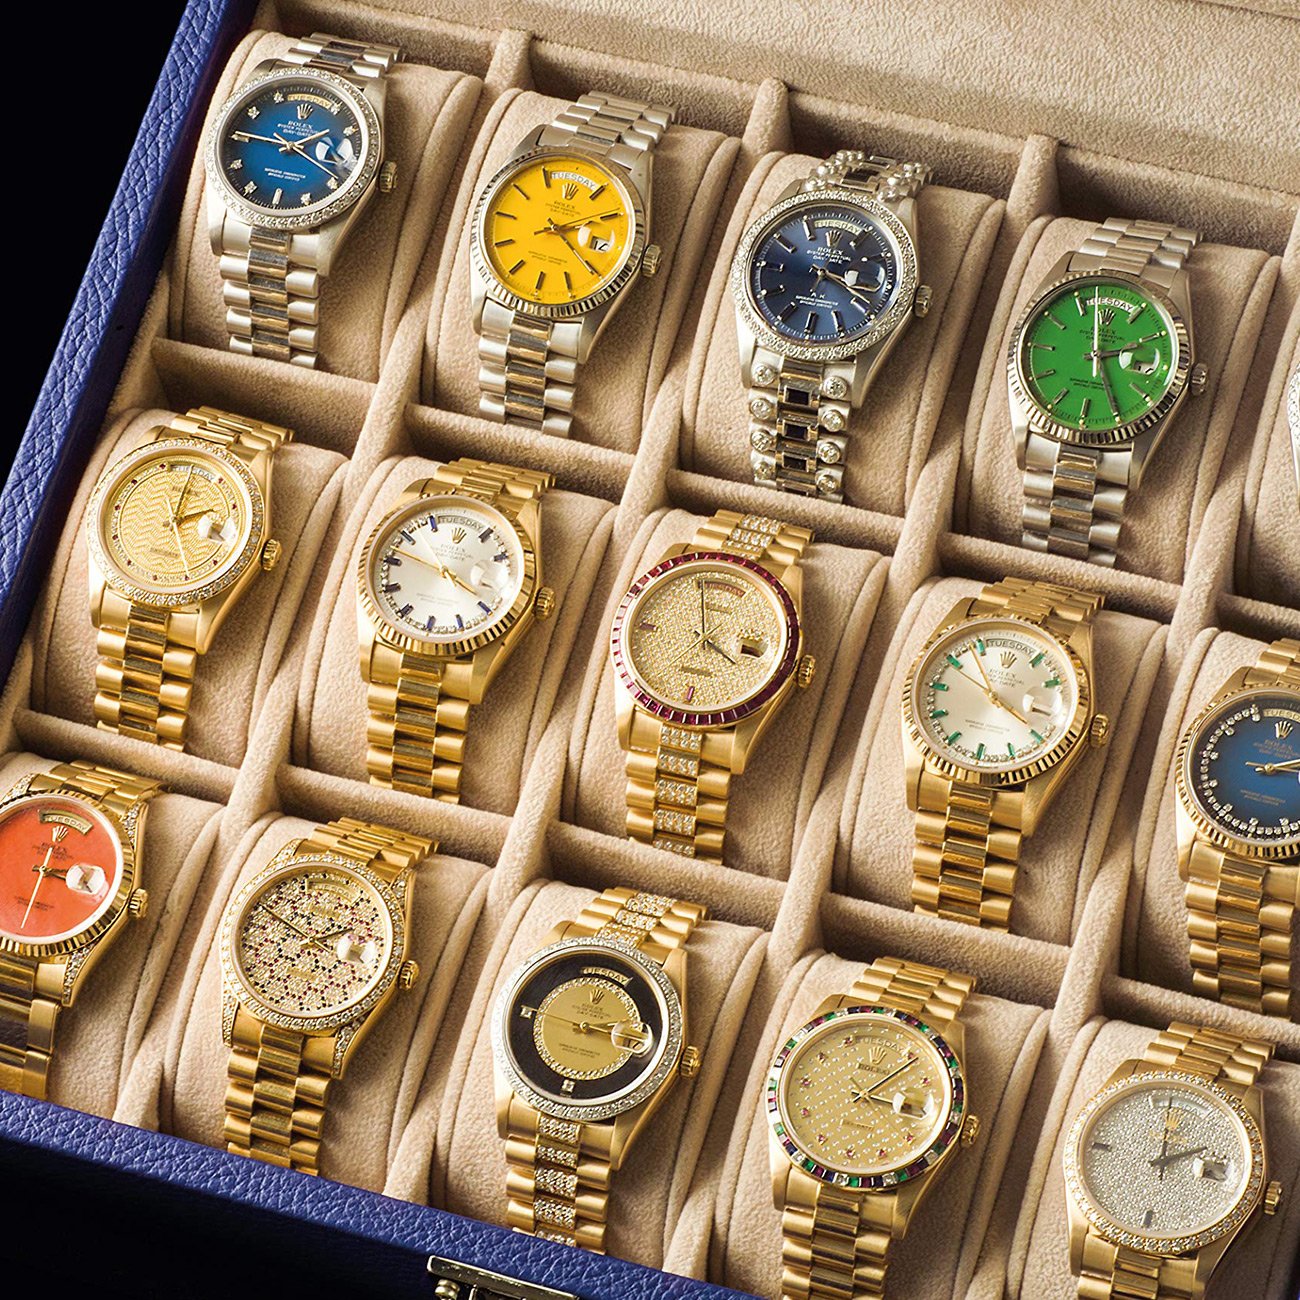 Vintage Rolex - The Largest Collection in the World